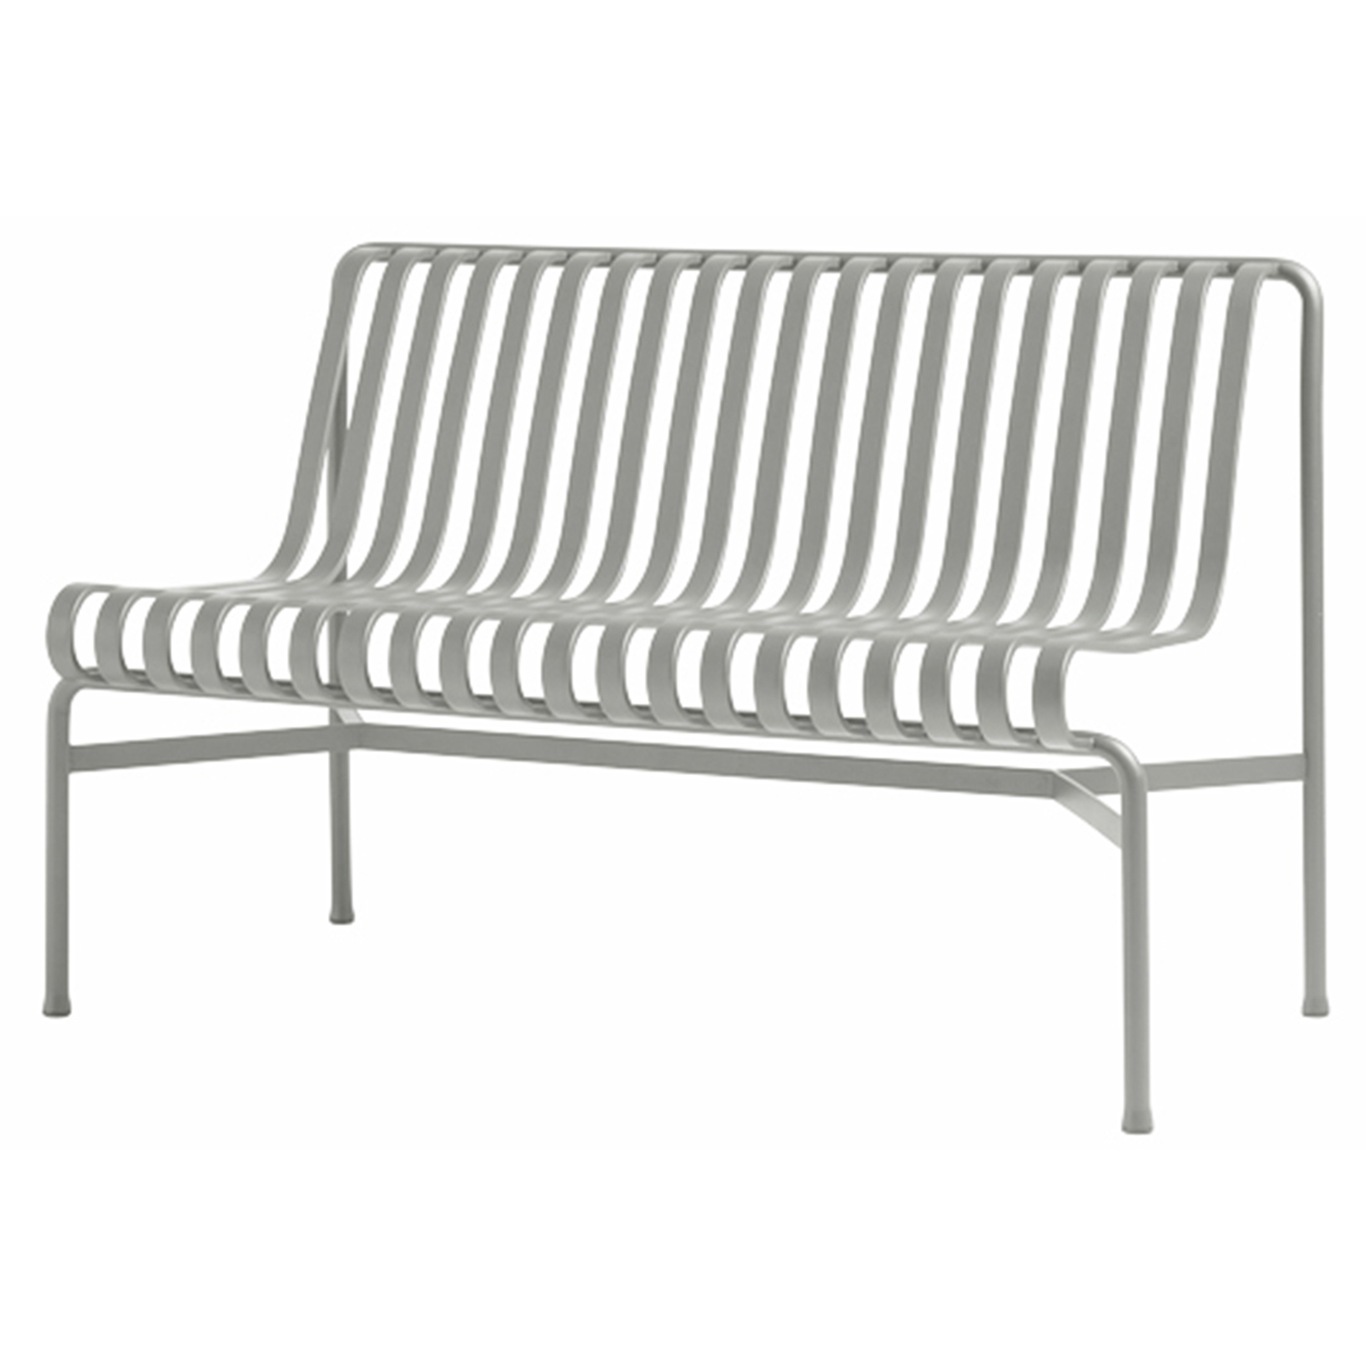 Palissade Dining Bench Without Armrests, Sky Grey